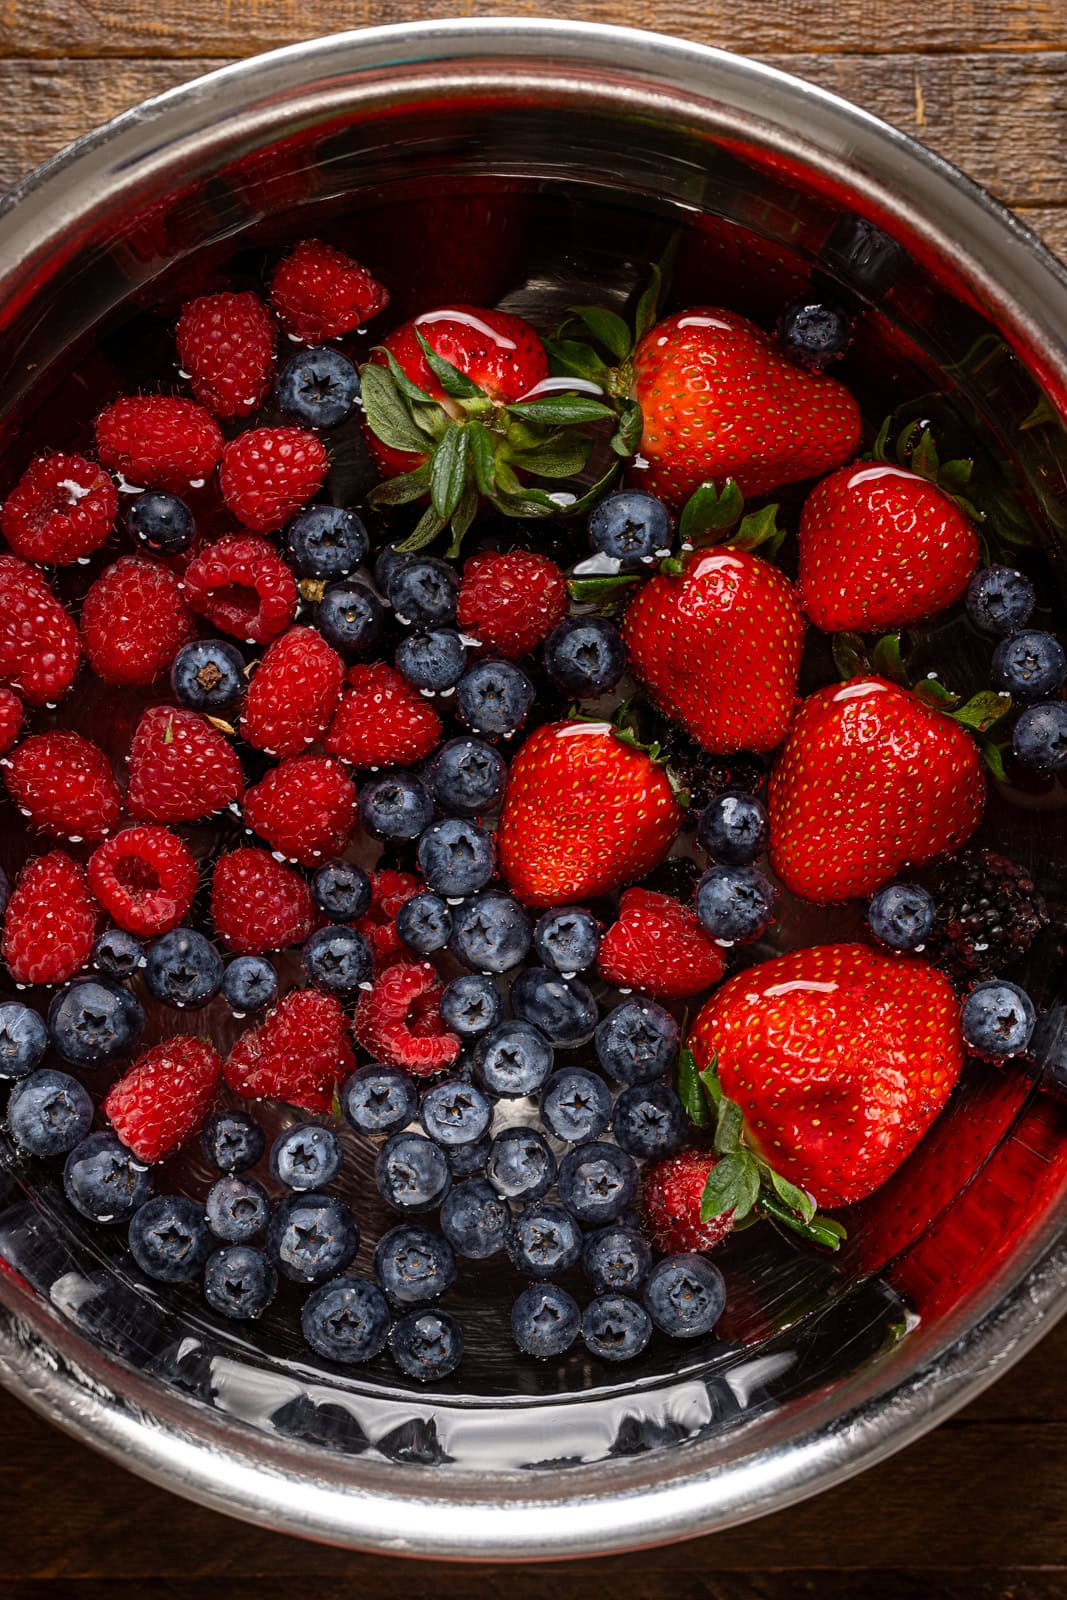 Fresh berries being soaked in a bowl with water.